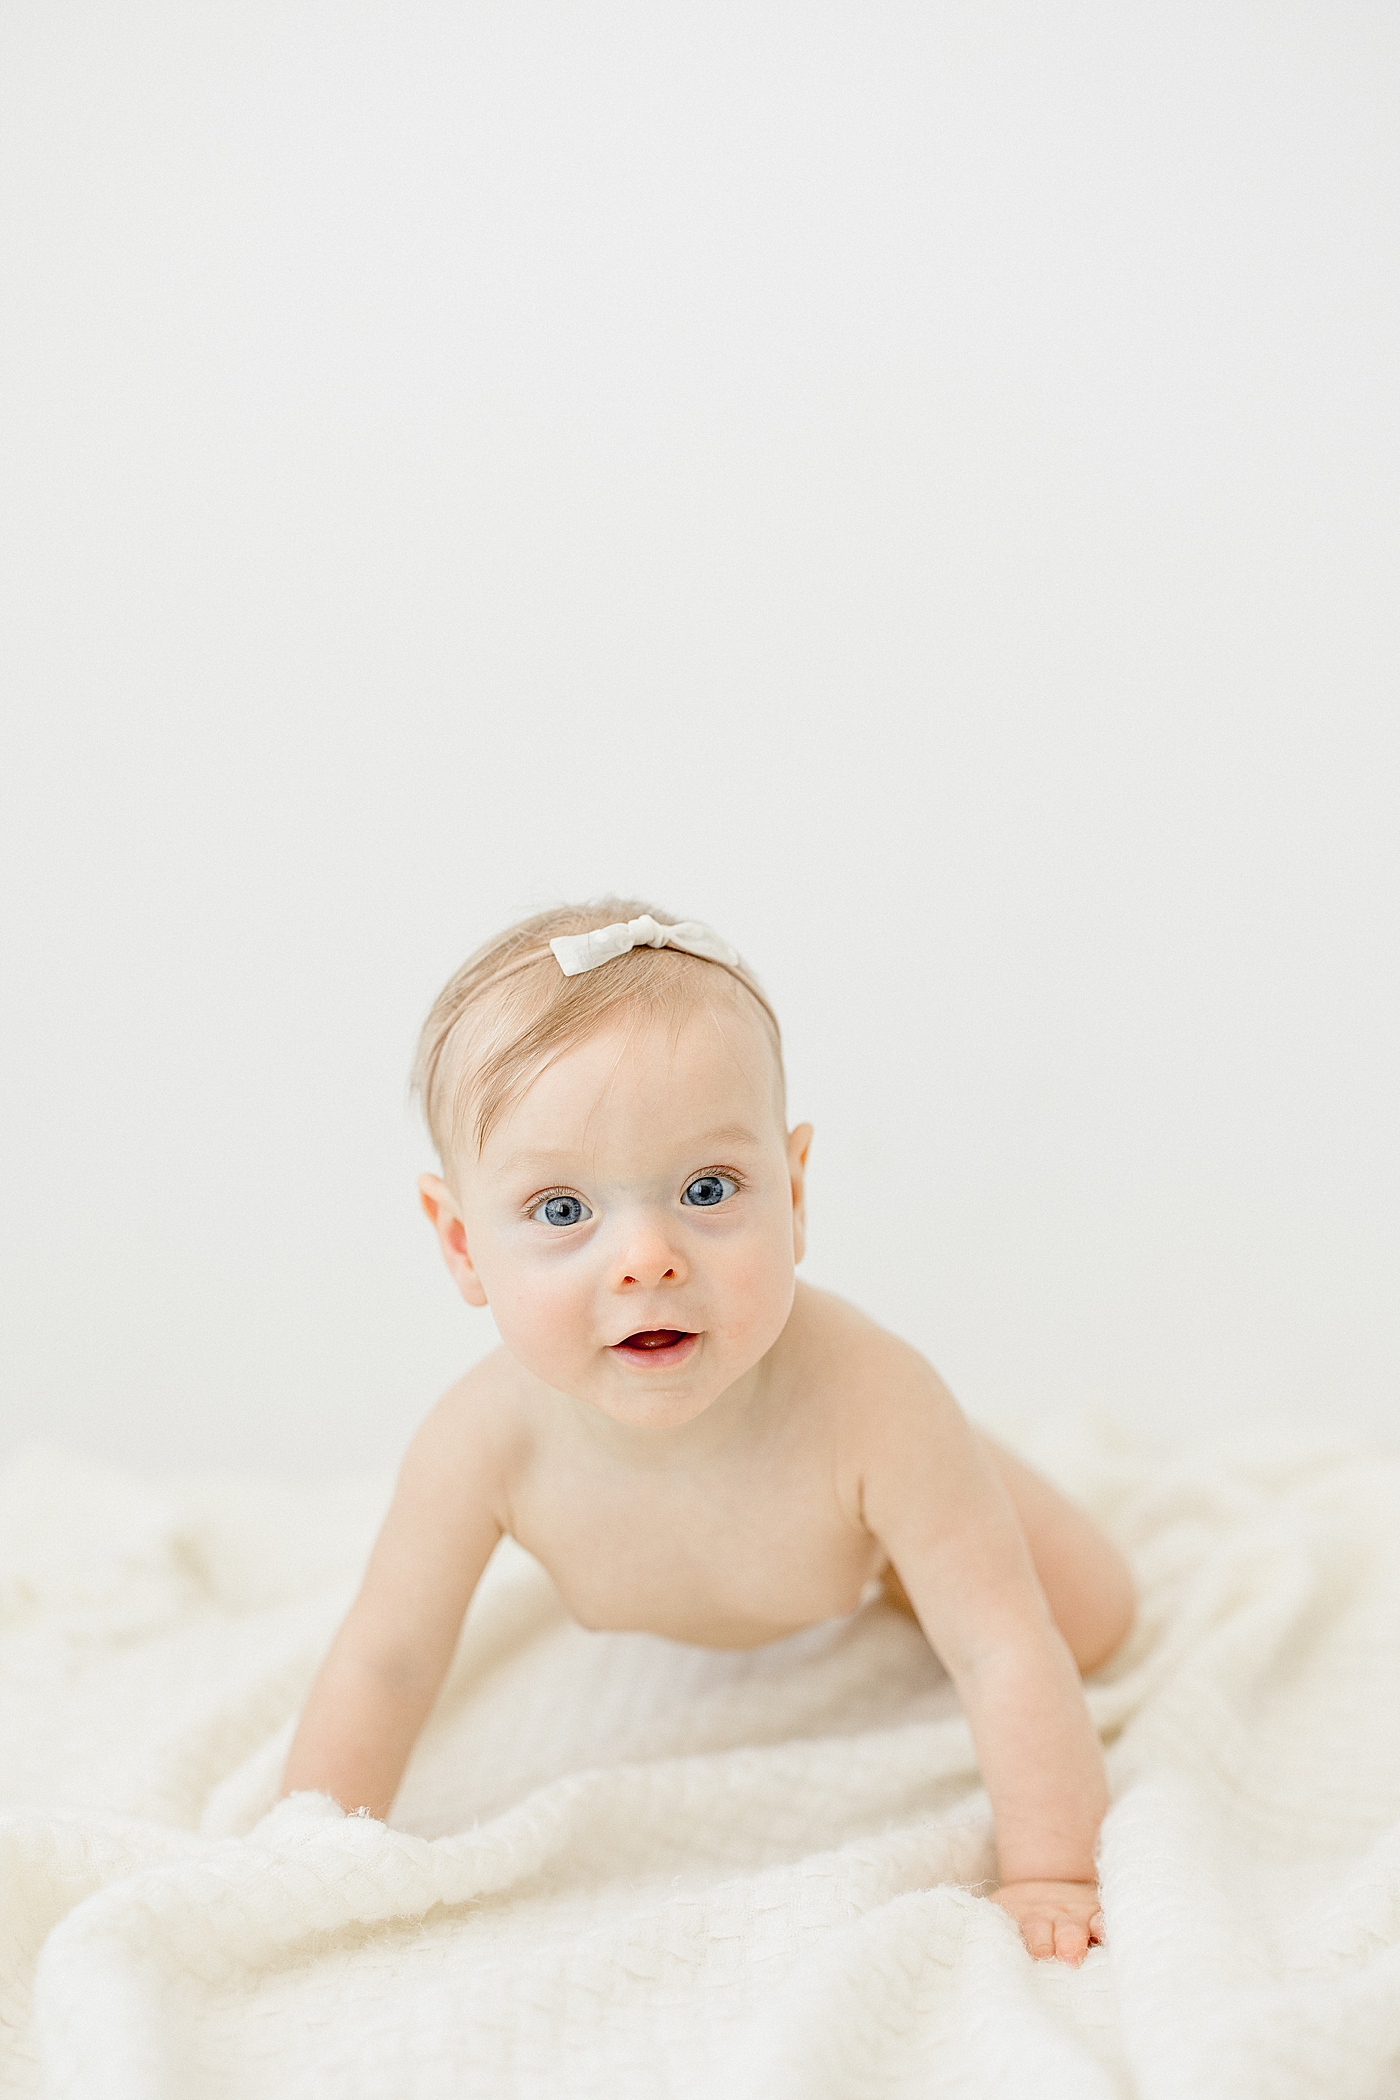 Tampa baby photographer, Brittany Elise Photography, photographs six month old milestone session in studio.